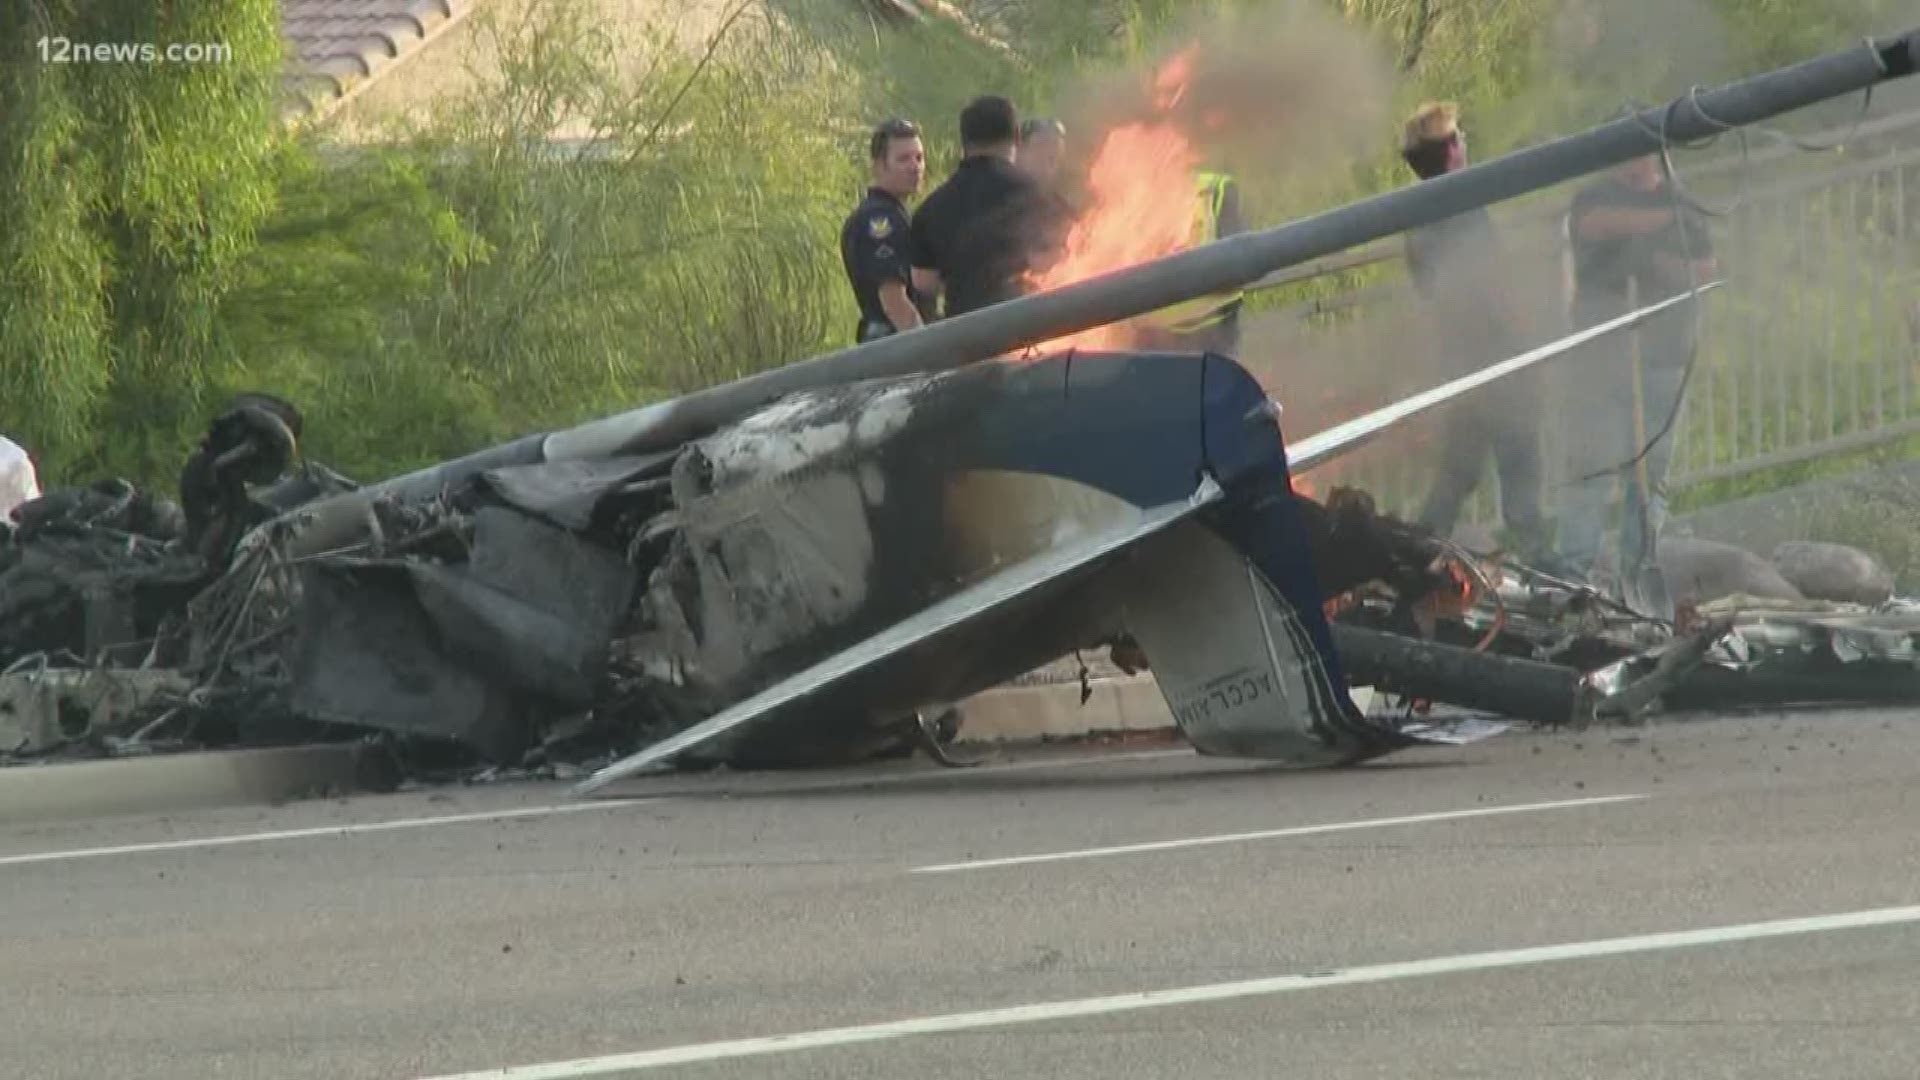 Officials continue to investigate what caused a small plane to crash on a busy street in North Phoenix Tuesday. The 50-year-old pilot is still in critical condition and one Good Samaritan is being called a hero for pulling the pilot out of the burning wreckage.